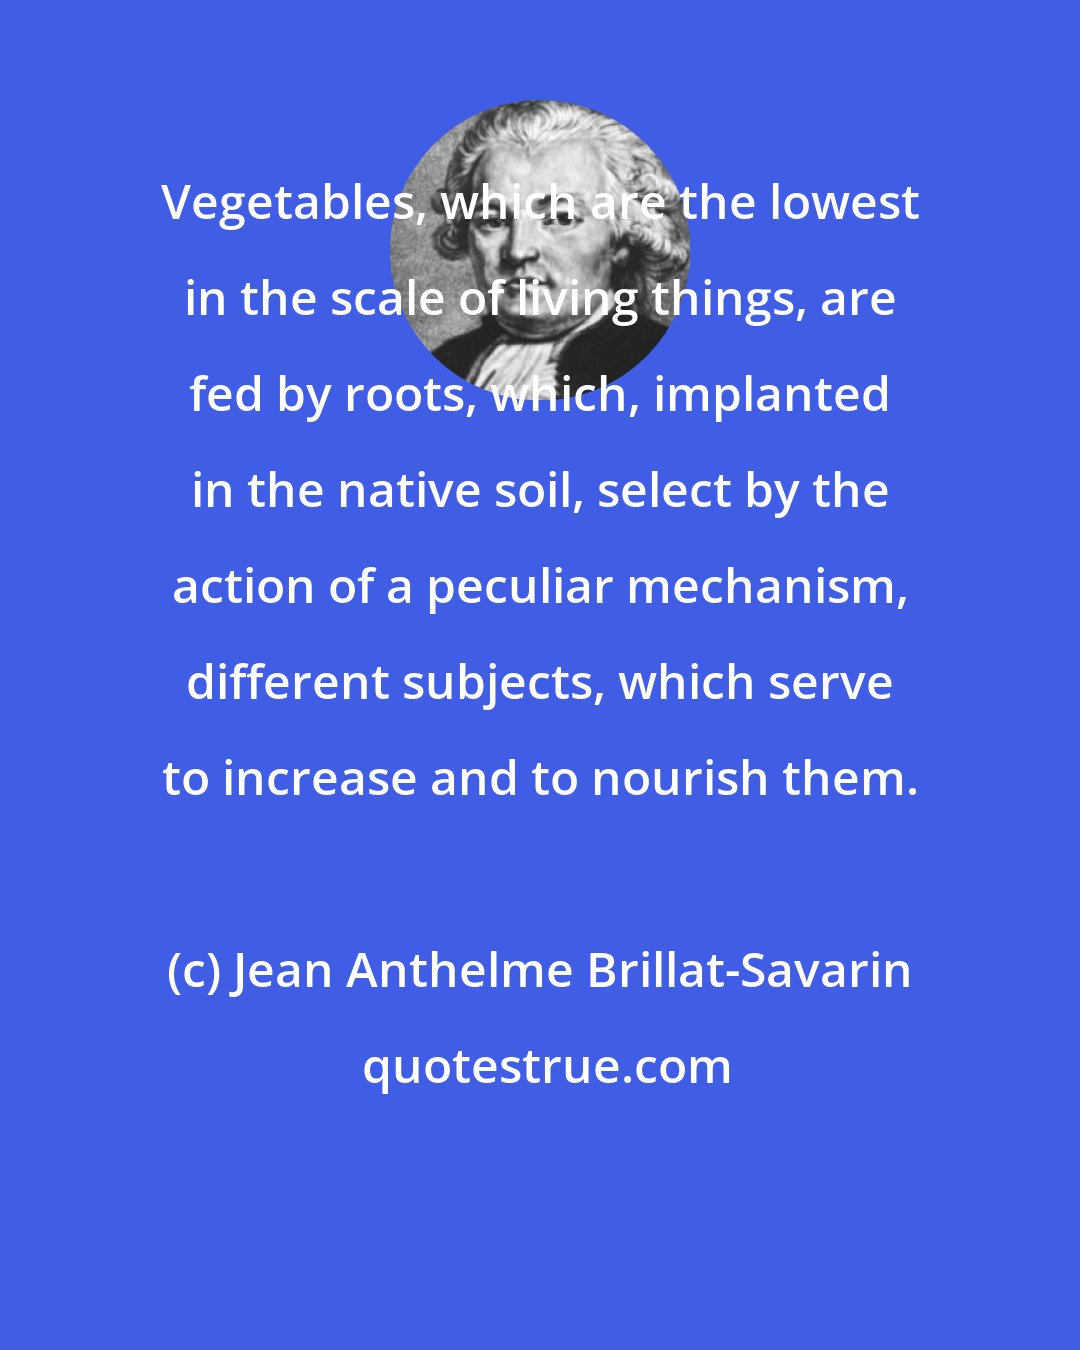 Jean Anthelme Brillat-Savarin: Vegetables, which are the lowest in the scale of living things, are fed by roots, which, implanted in the native soil, select by the action of a peculiar mechanism, different subjects, which serve to increase and to nourish them.